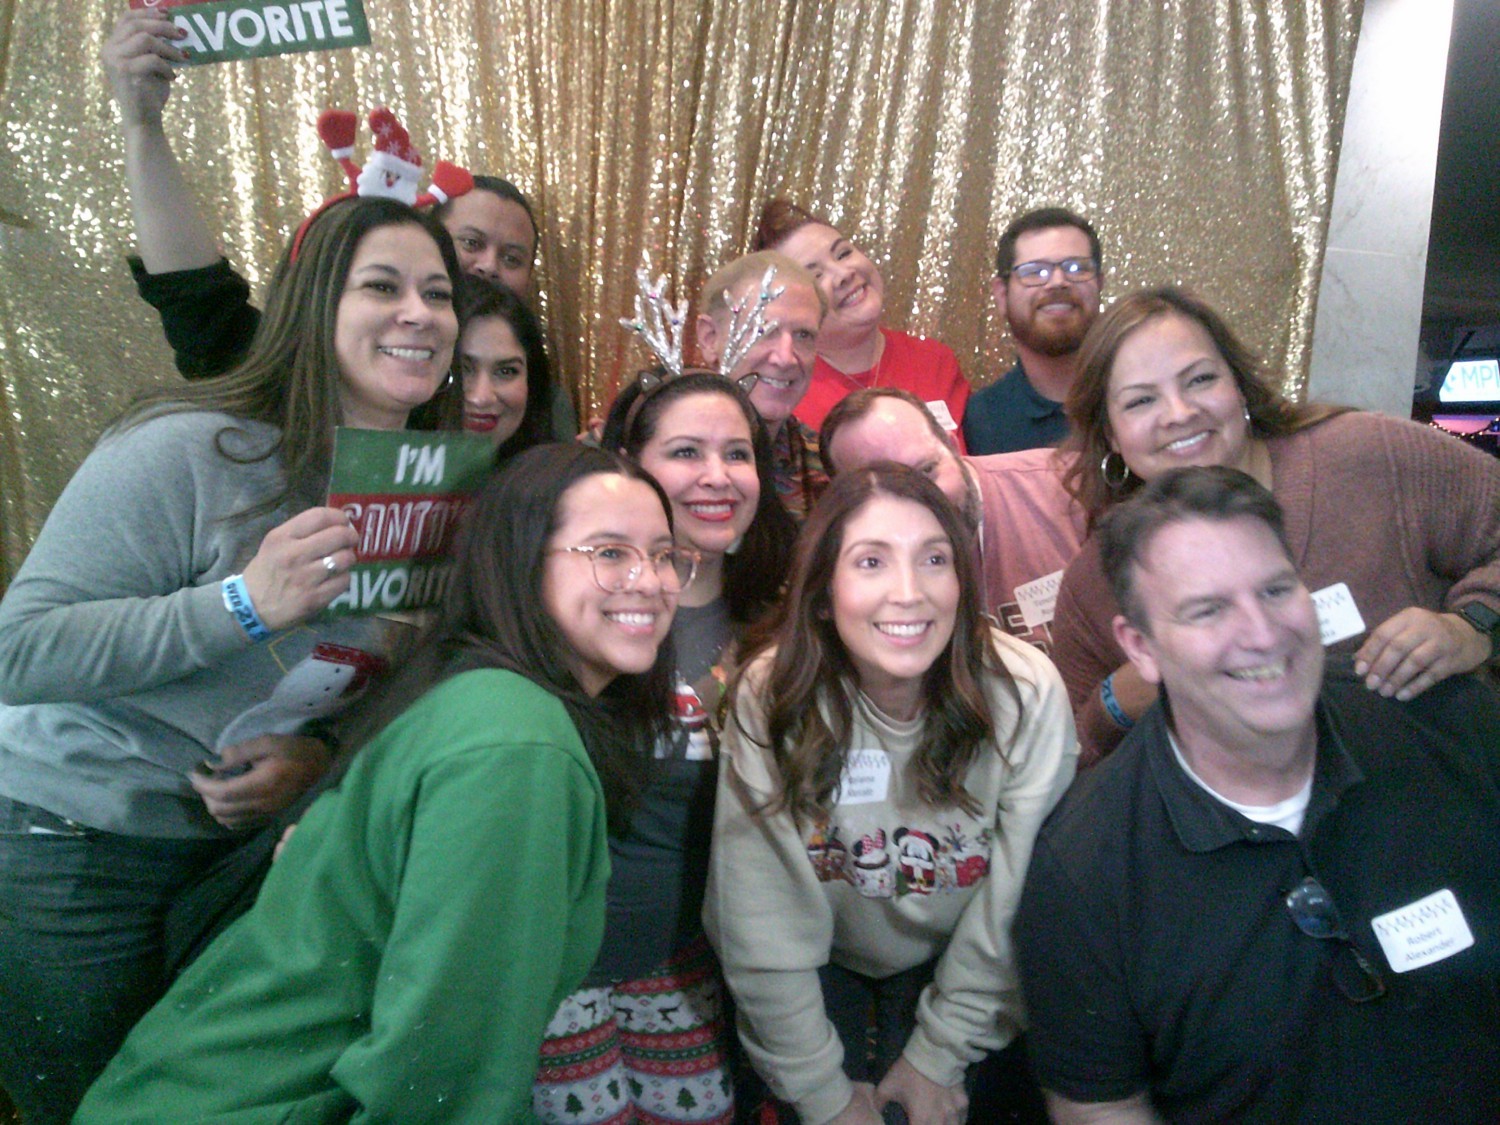 Celebrating year-end accomplishments at holiday party photo booth!